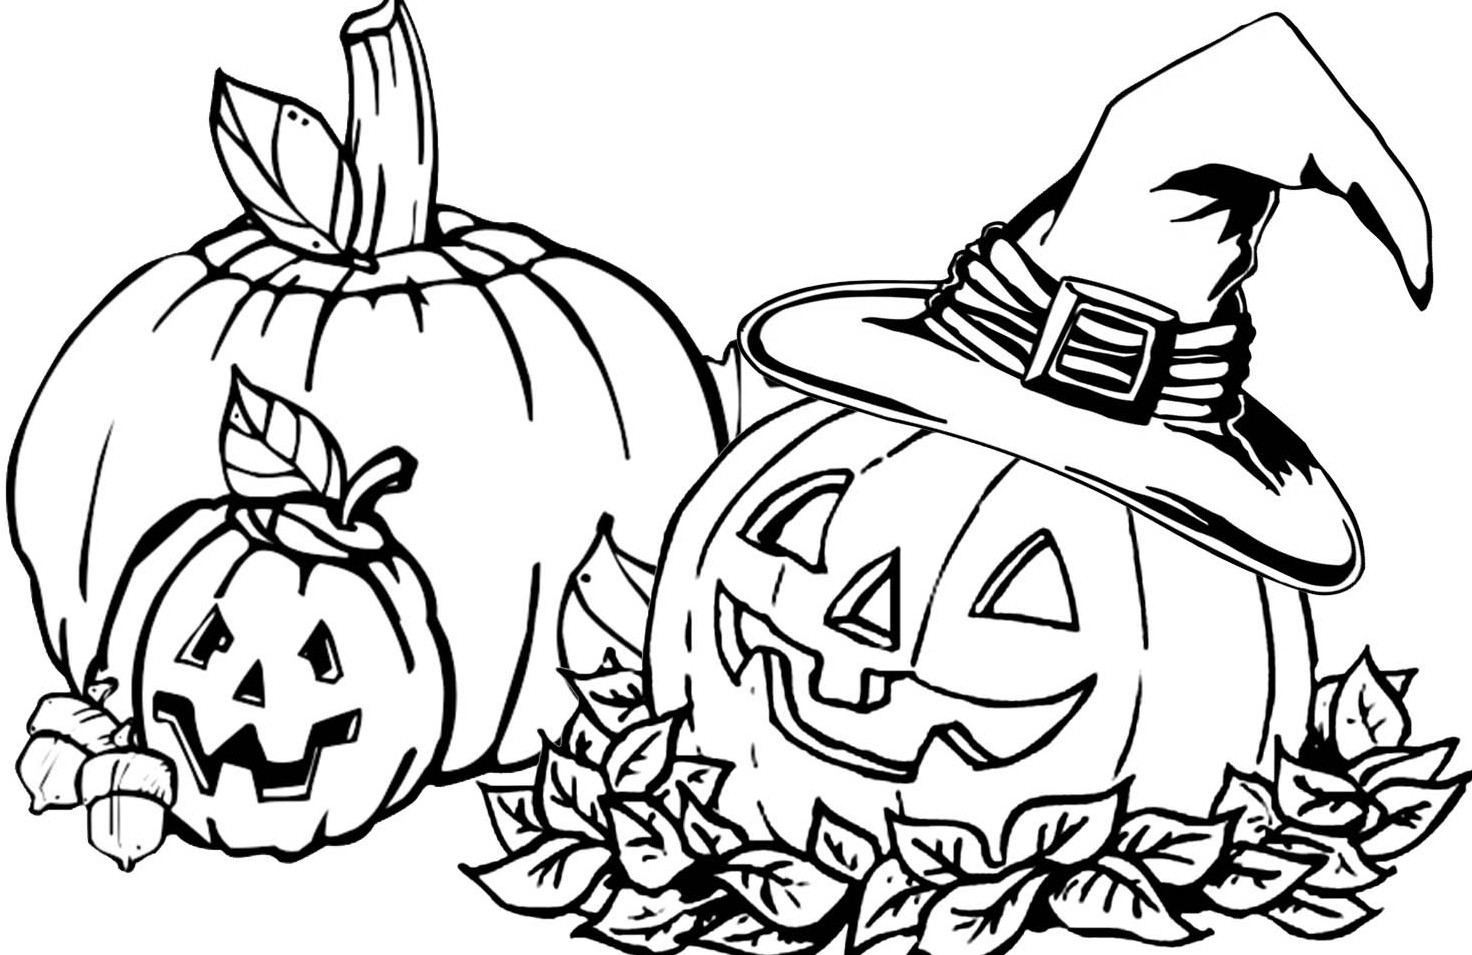 Pumpkin Coloring Pages For Toddlers
 Pumpkin Coloring Pages